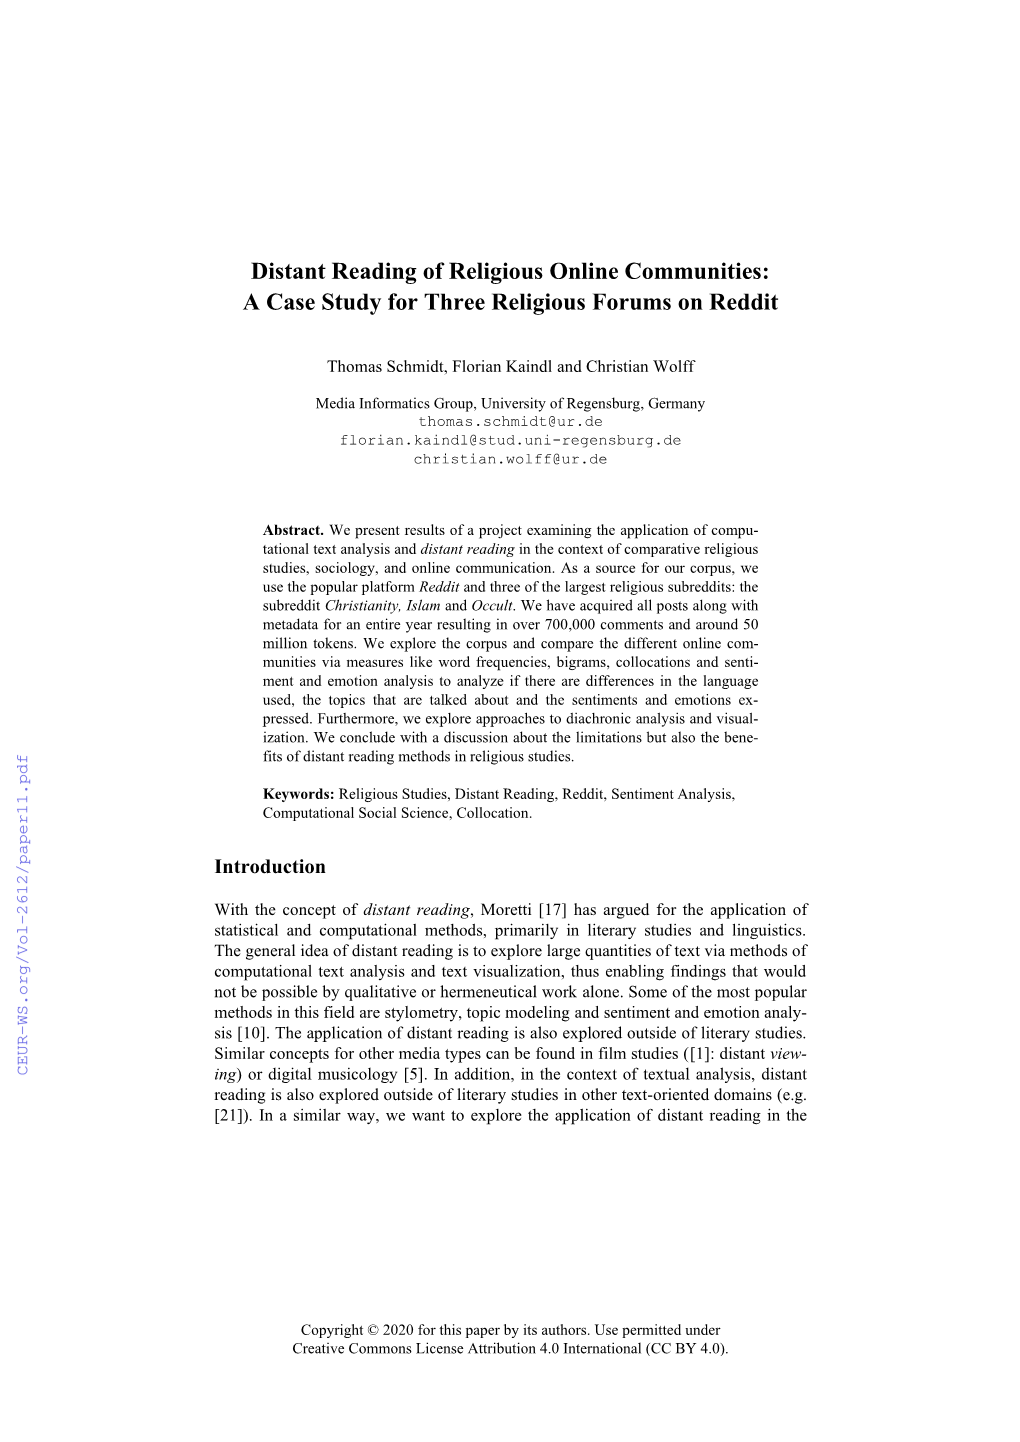 Distant Reading of Religious Online Communities: a Case Study for Three Religious Forums on Reddit